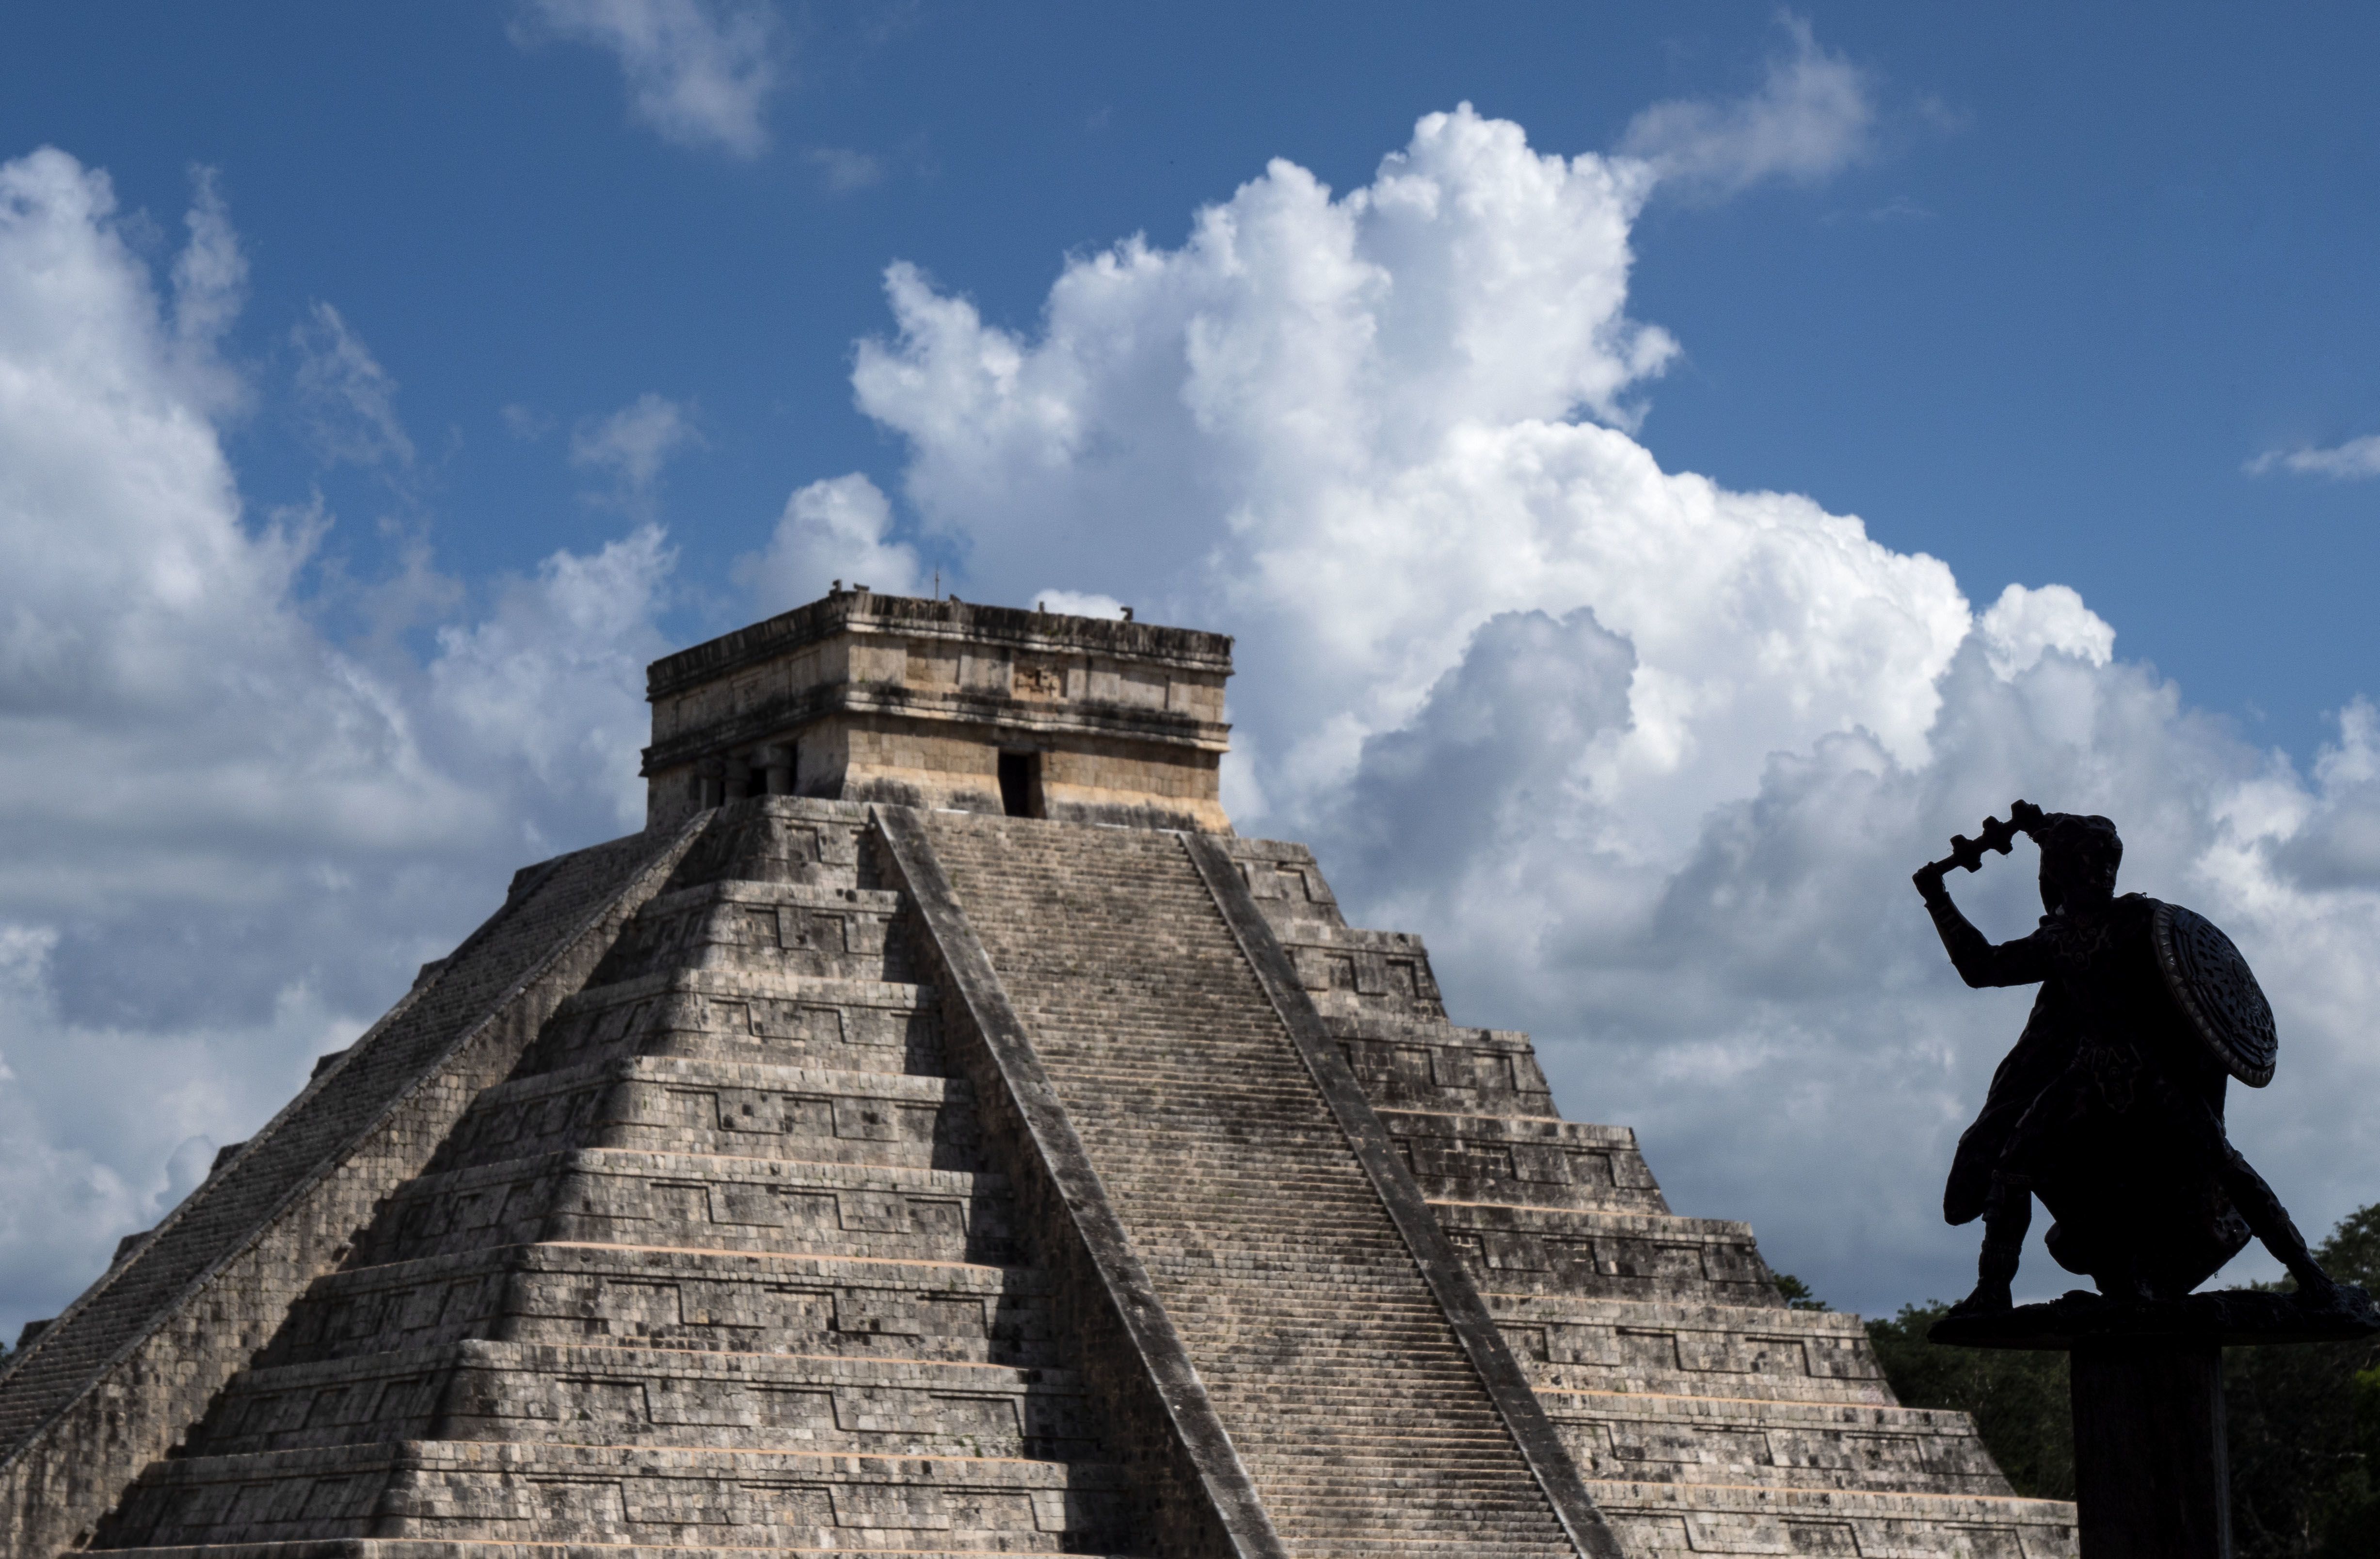 The New York Times presents the New Seven Wonders of the World in 360 video